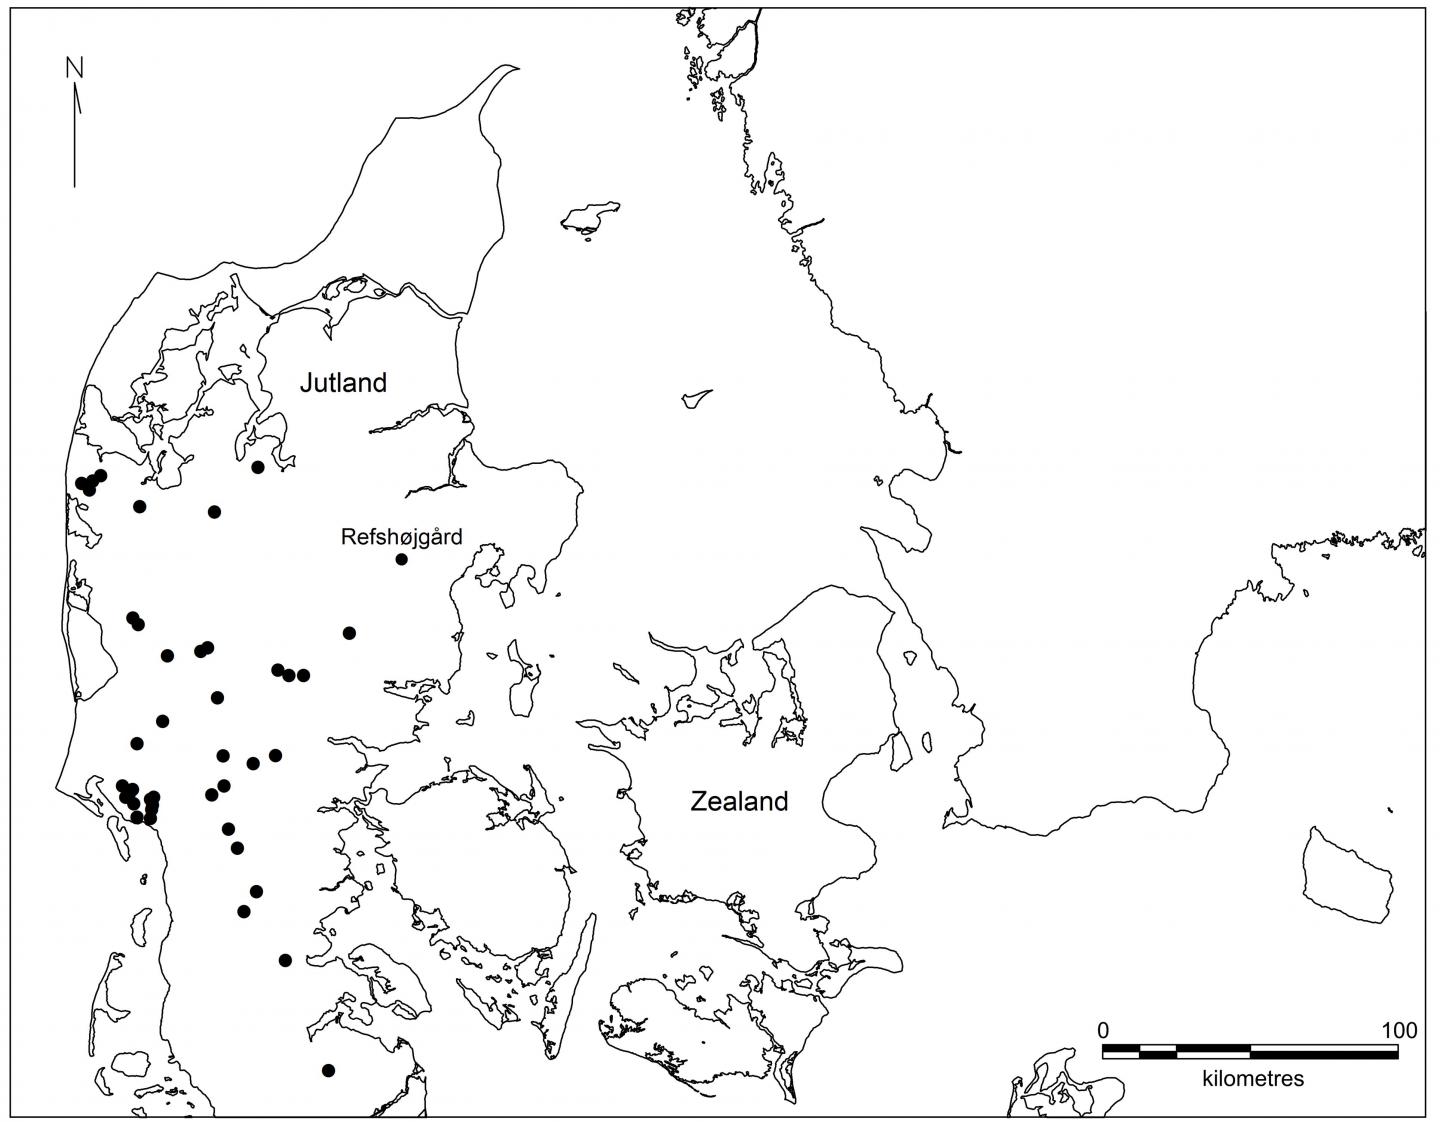 Single Grave Culture in Southern Scandinavia 2800 BC